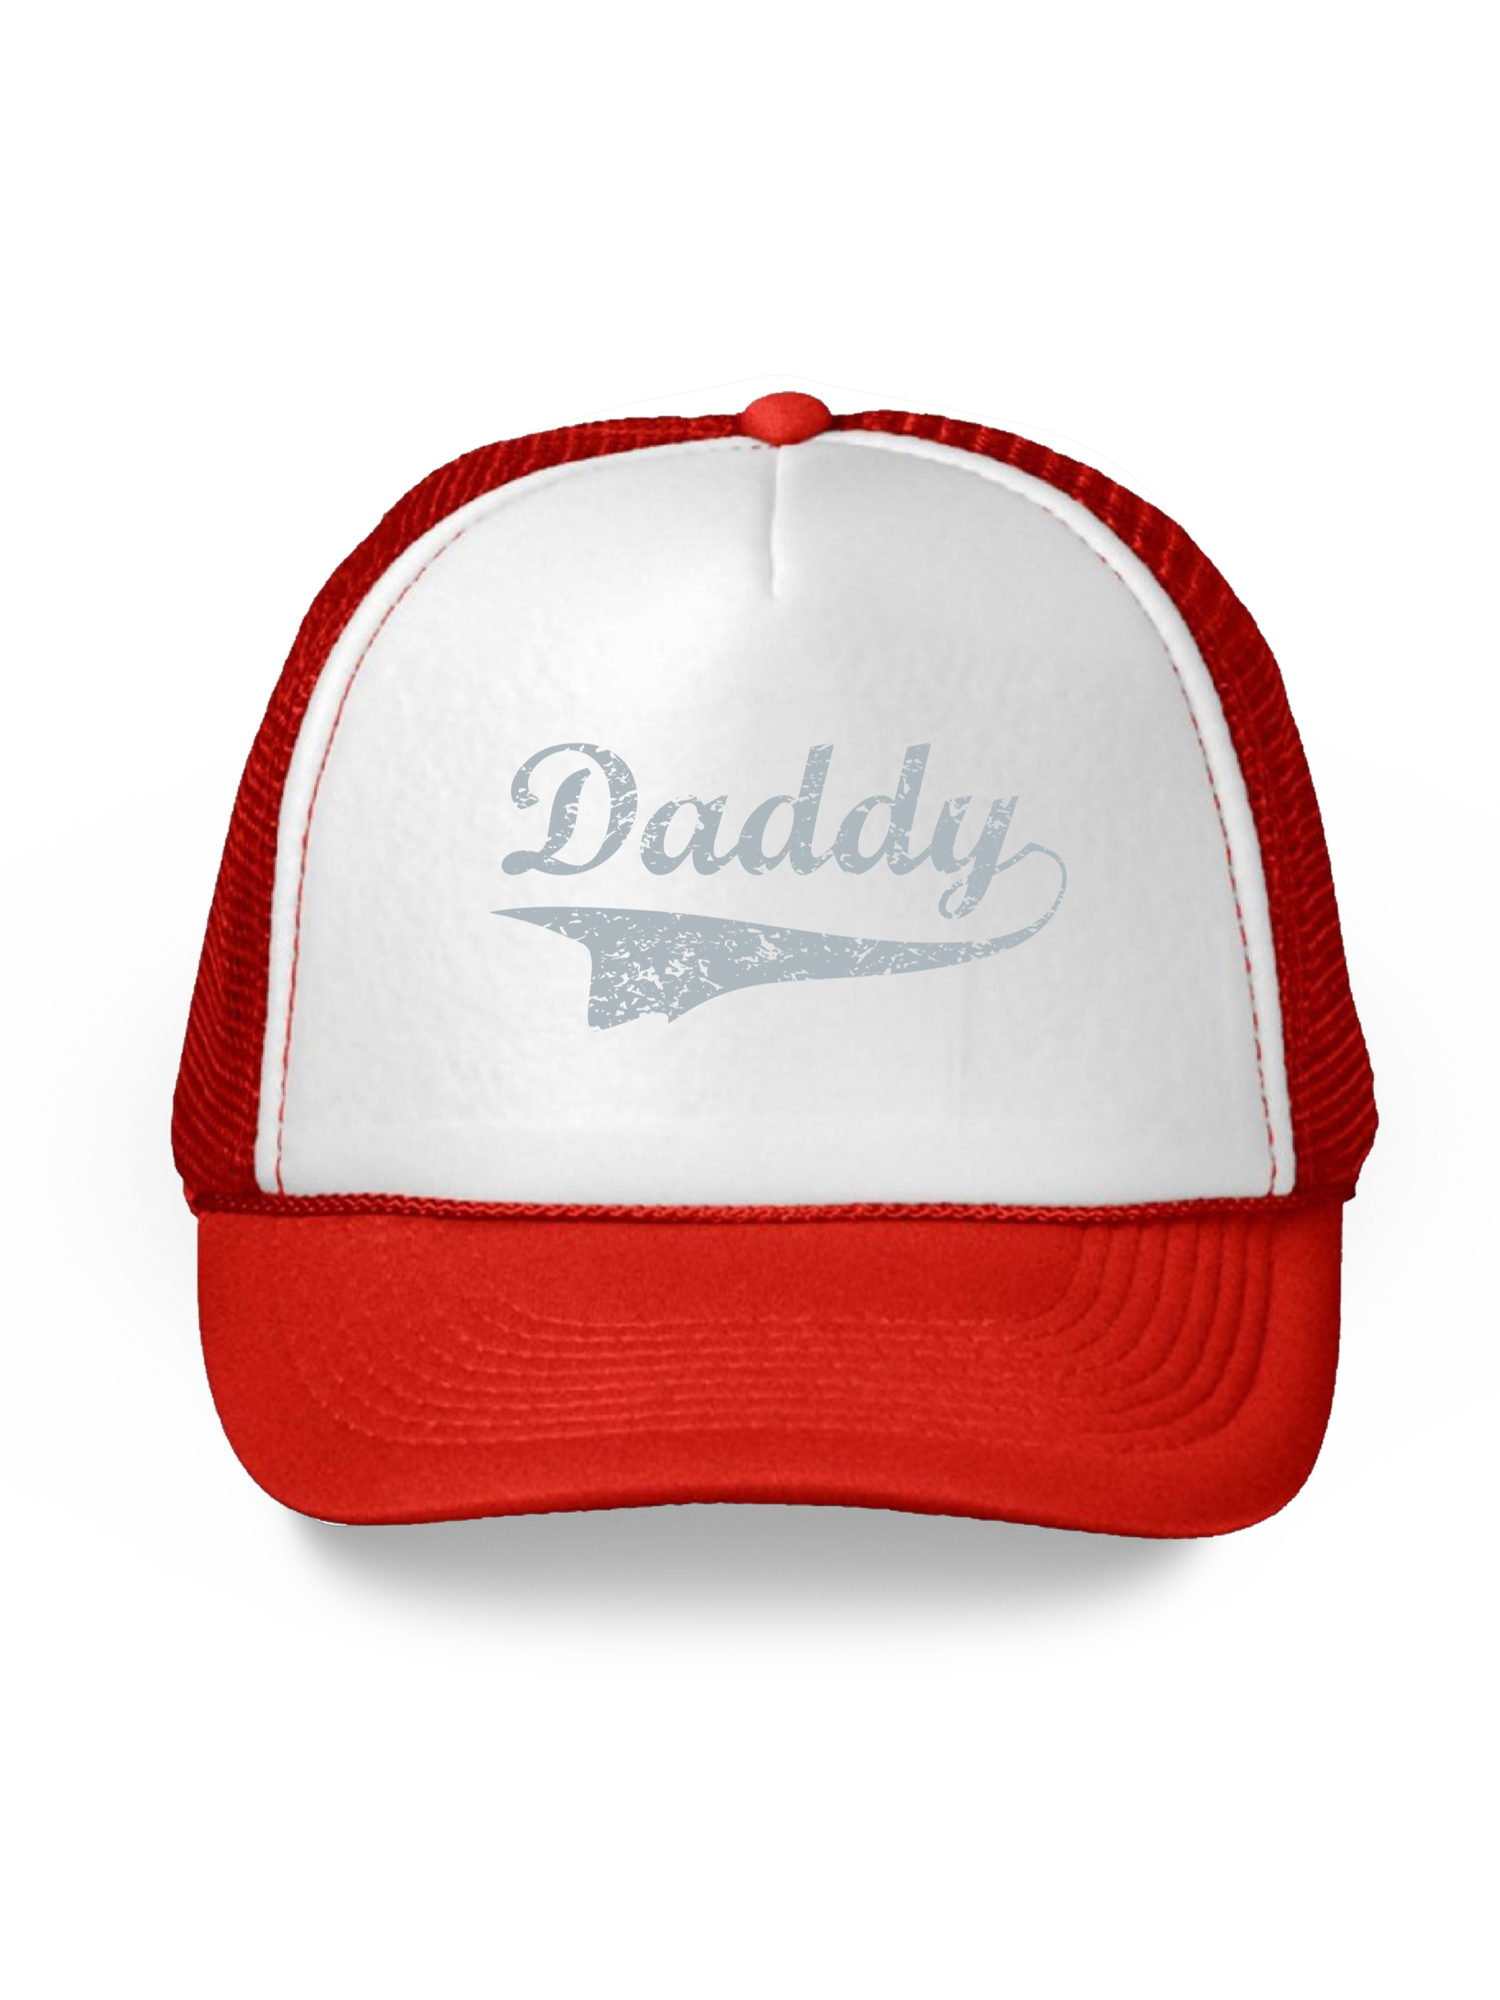 Awkward Styles Gifts for Dad Daddy Hat Father's Day Gifts for Men Dad Hats Dad 2018 Trucker Hat Funny Gifts for Dad Hat Accessories for Men Father Trucker Hat Daddy 2018 Snapback Hat Dad Hats - image 1 of 6